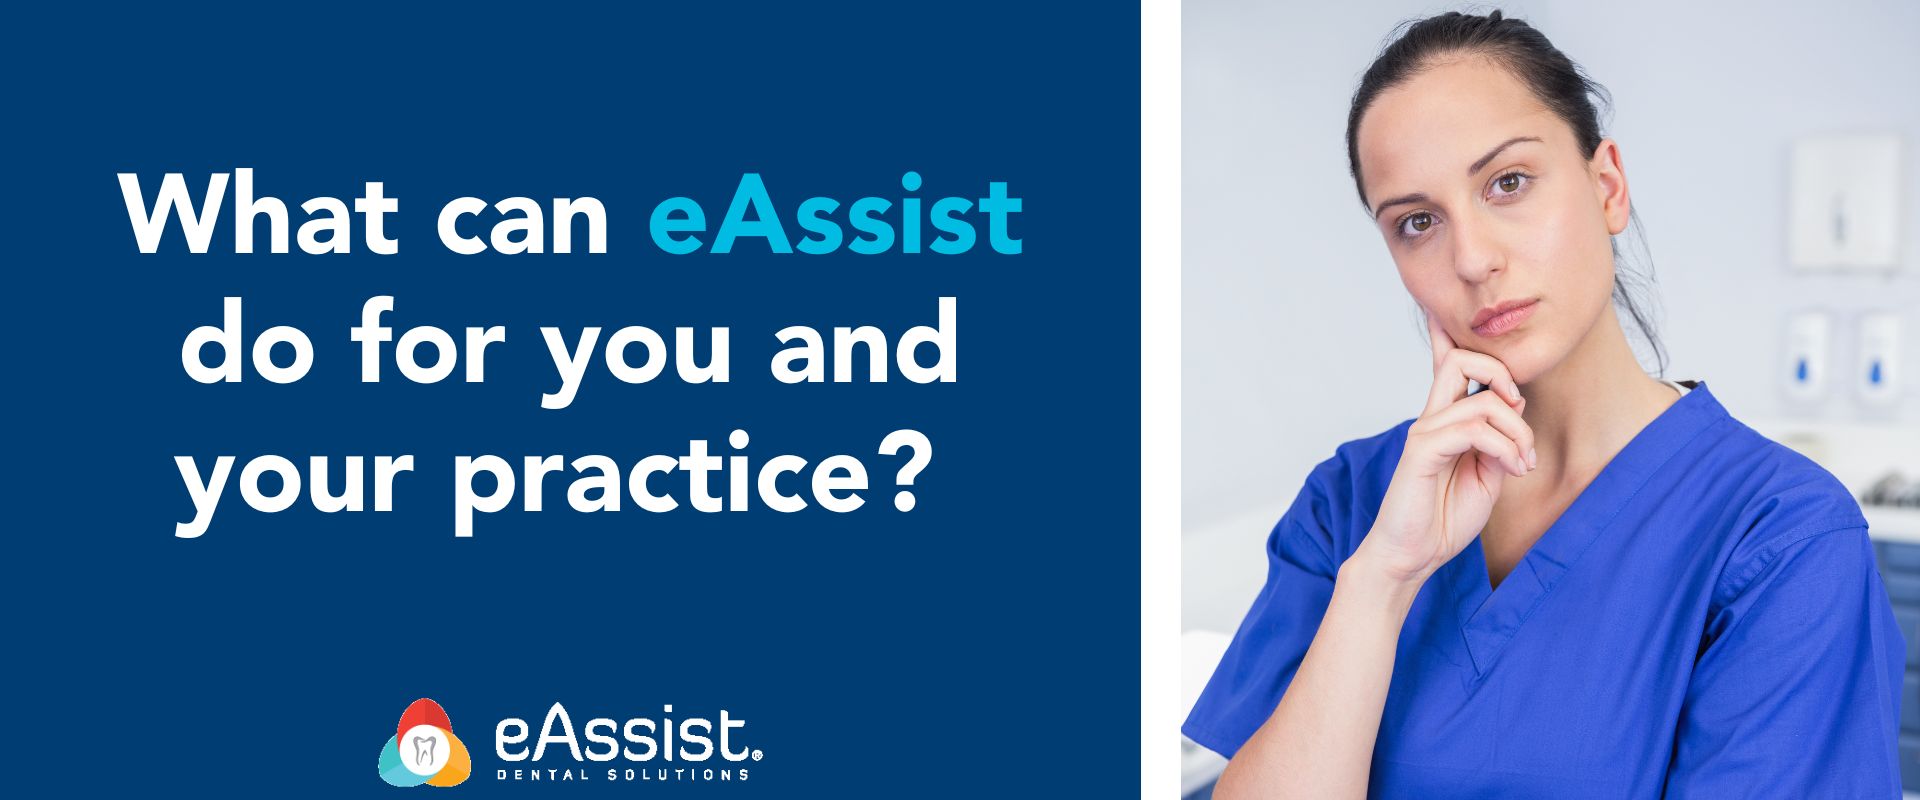 What can eAssist do for you and your practice?